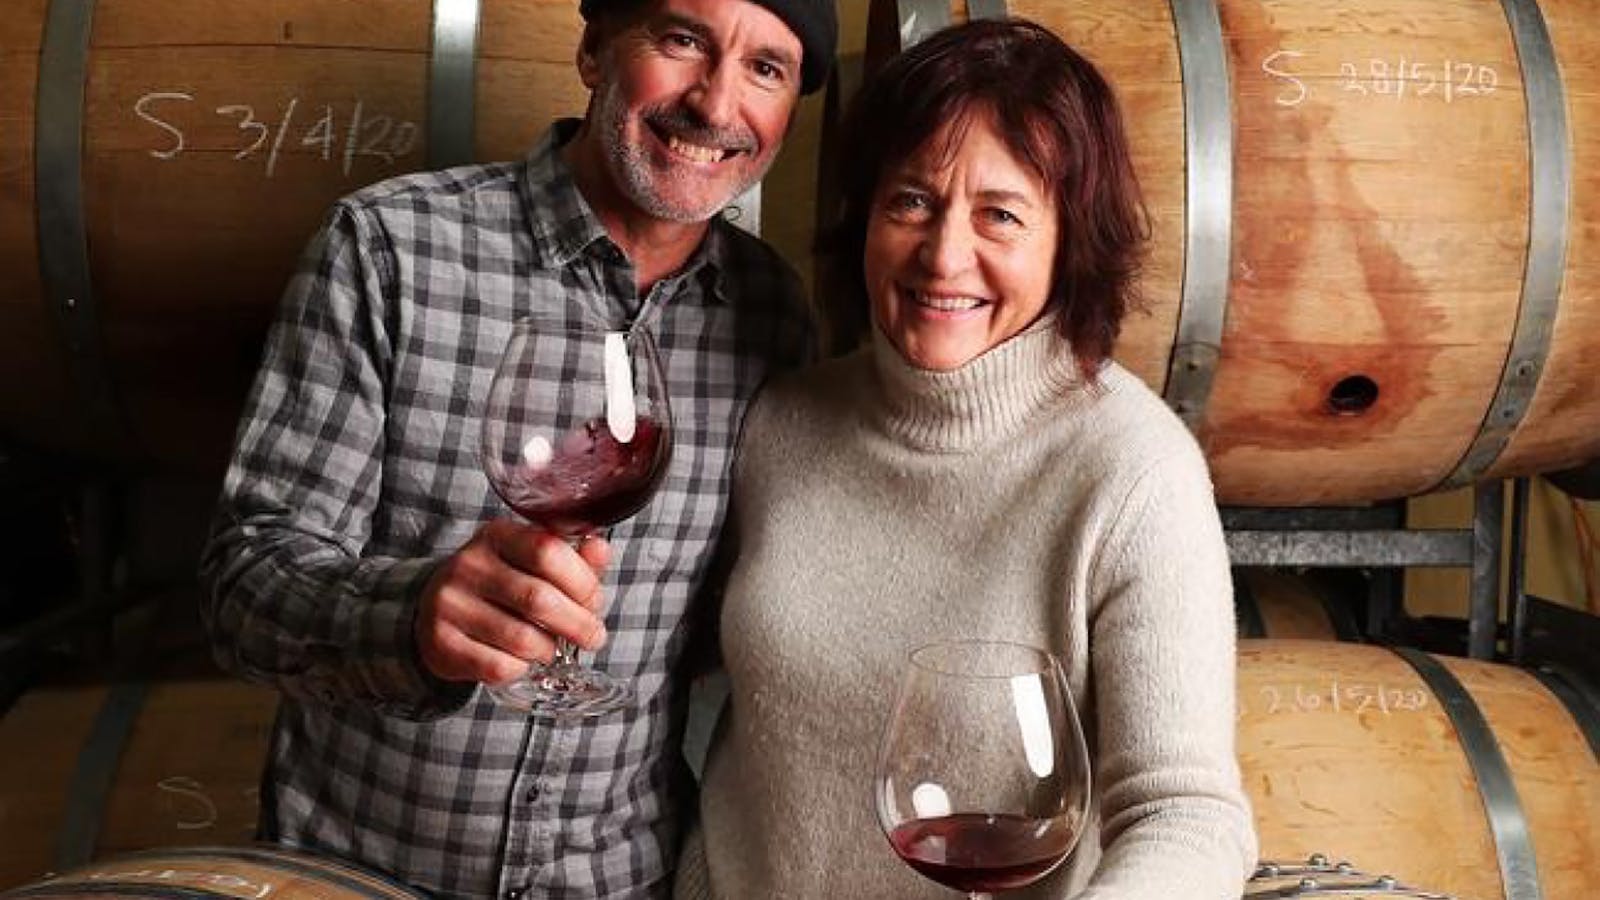 Meet Todd and Gill at their winery for tastings and sales of Brinktop Wine